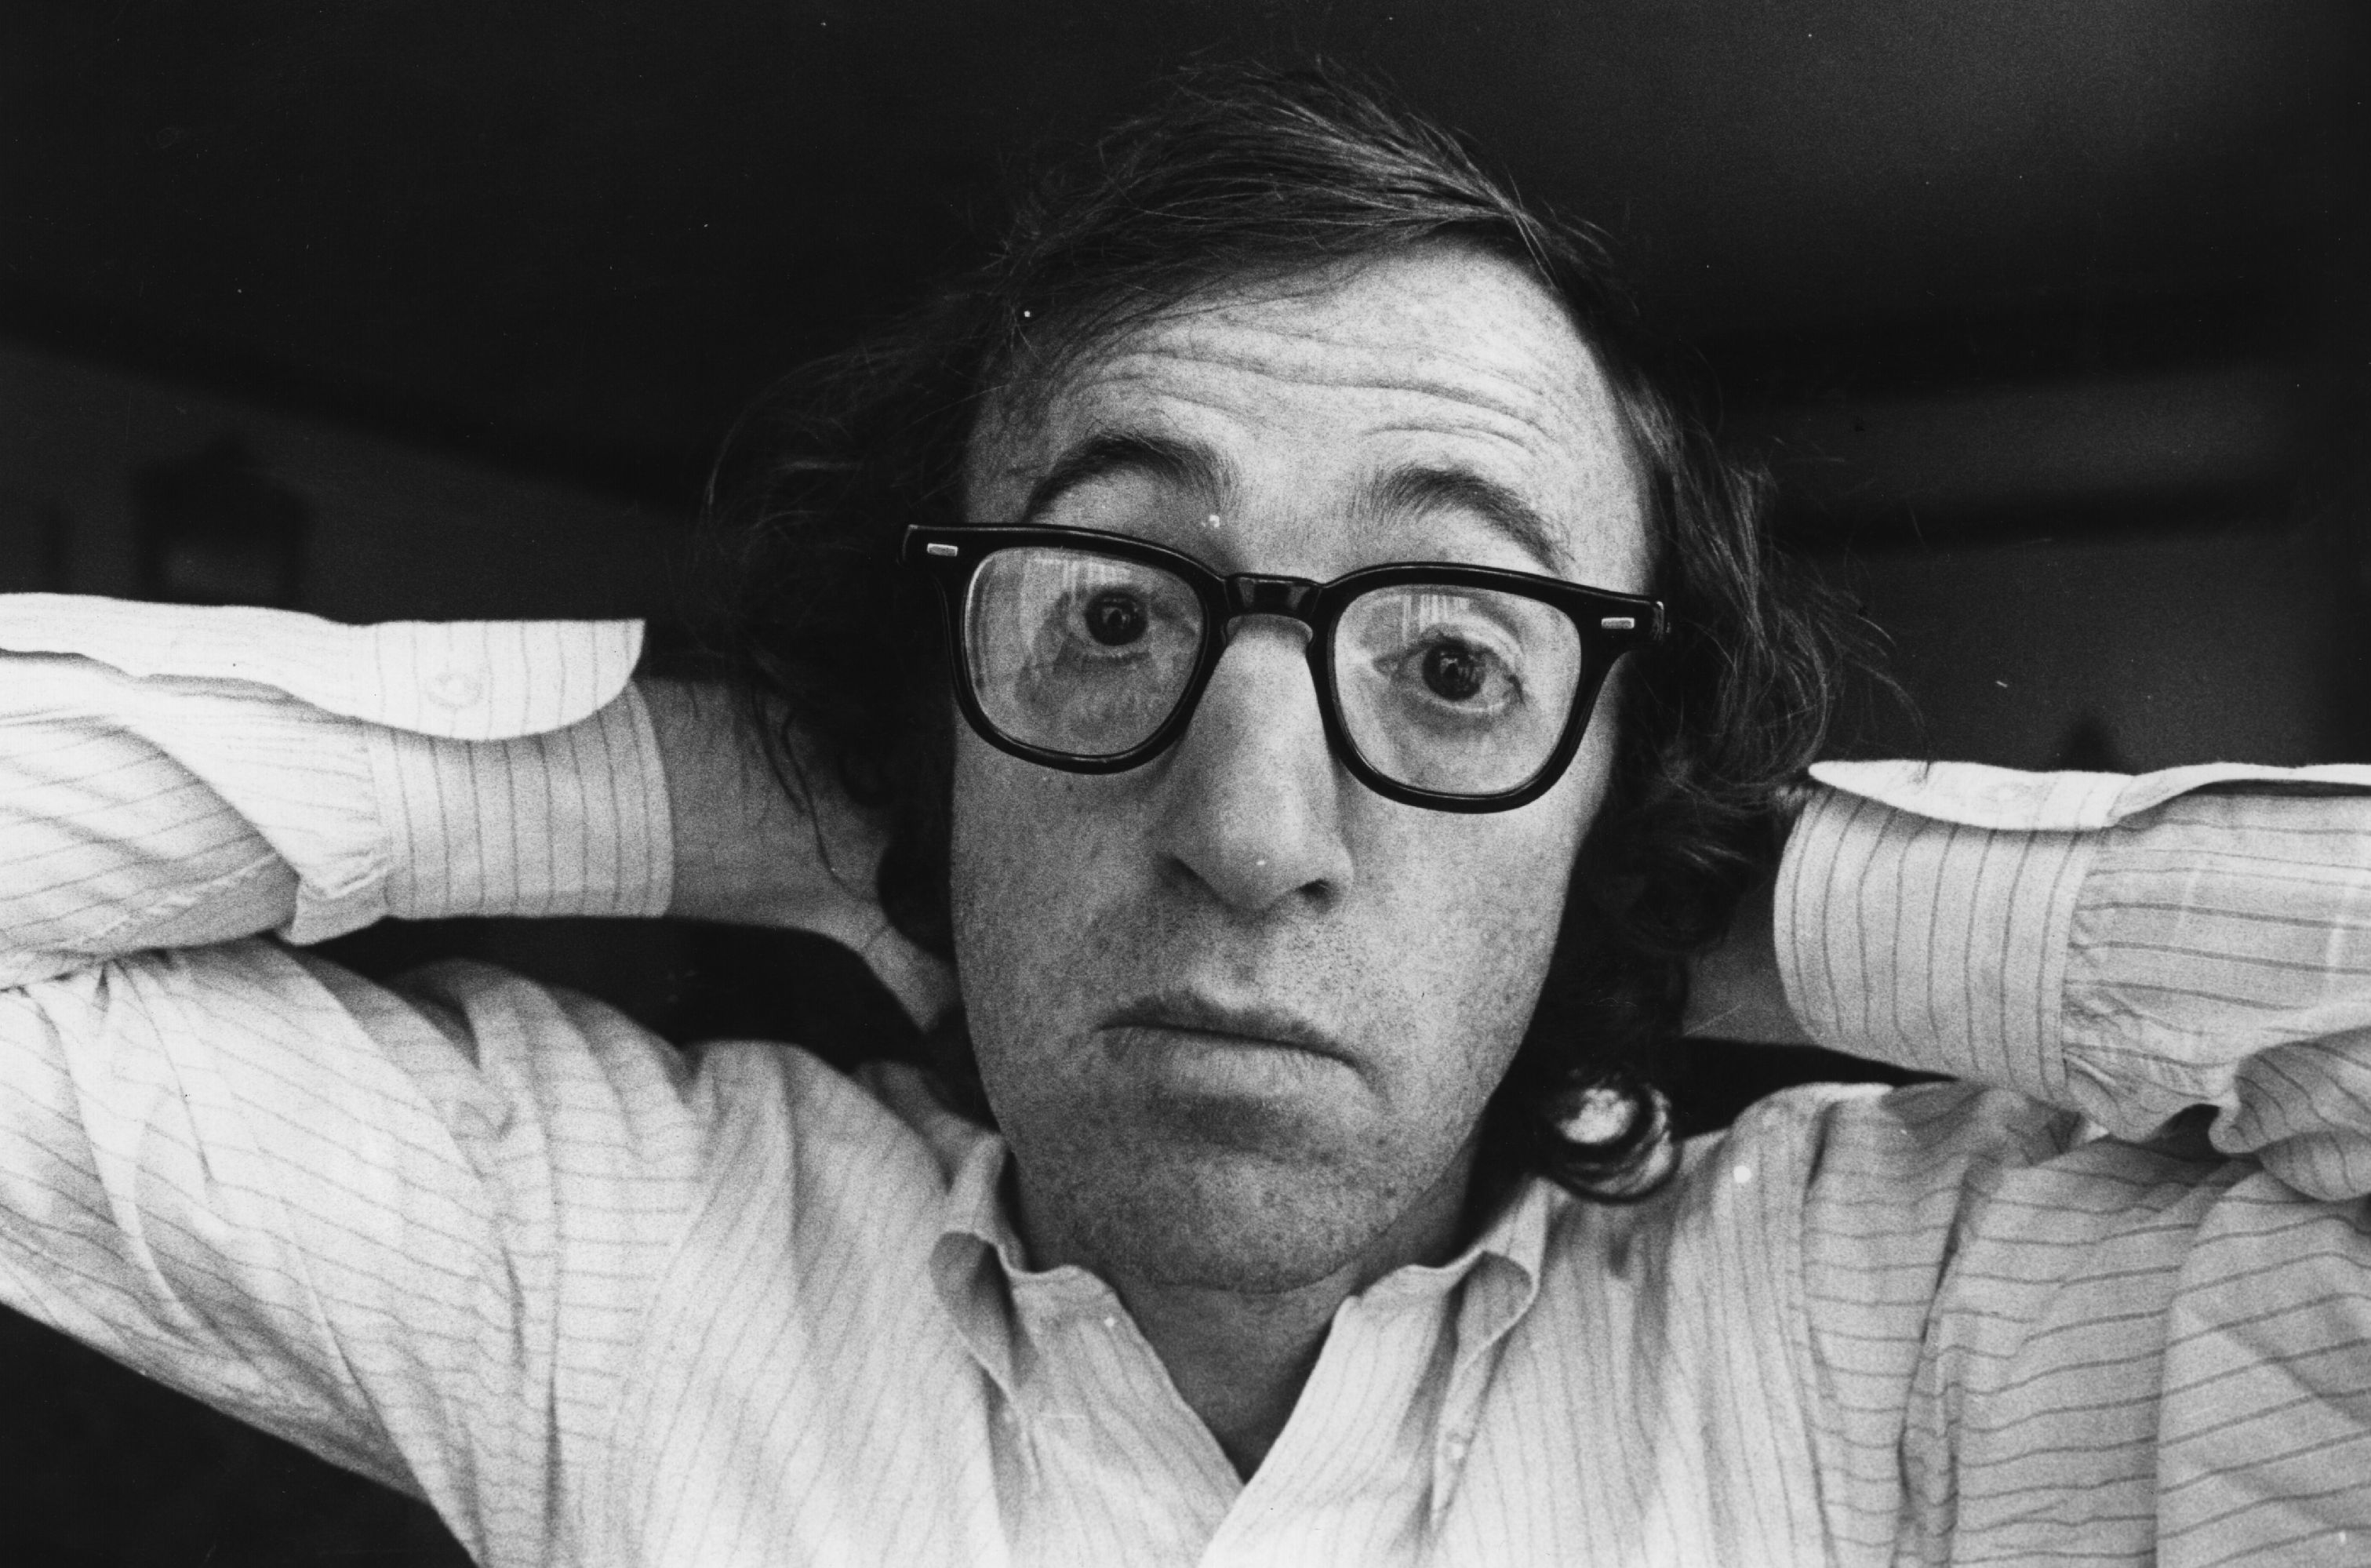 American writer, actor and film director Woody Allen. (Photo by Evening Standard/Getty Images)